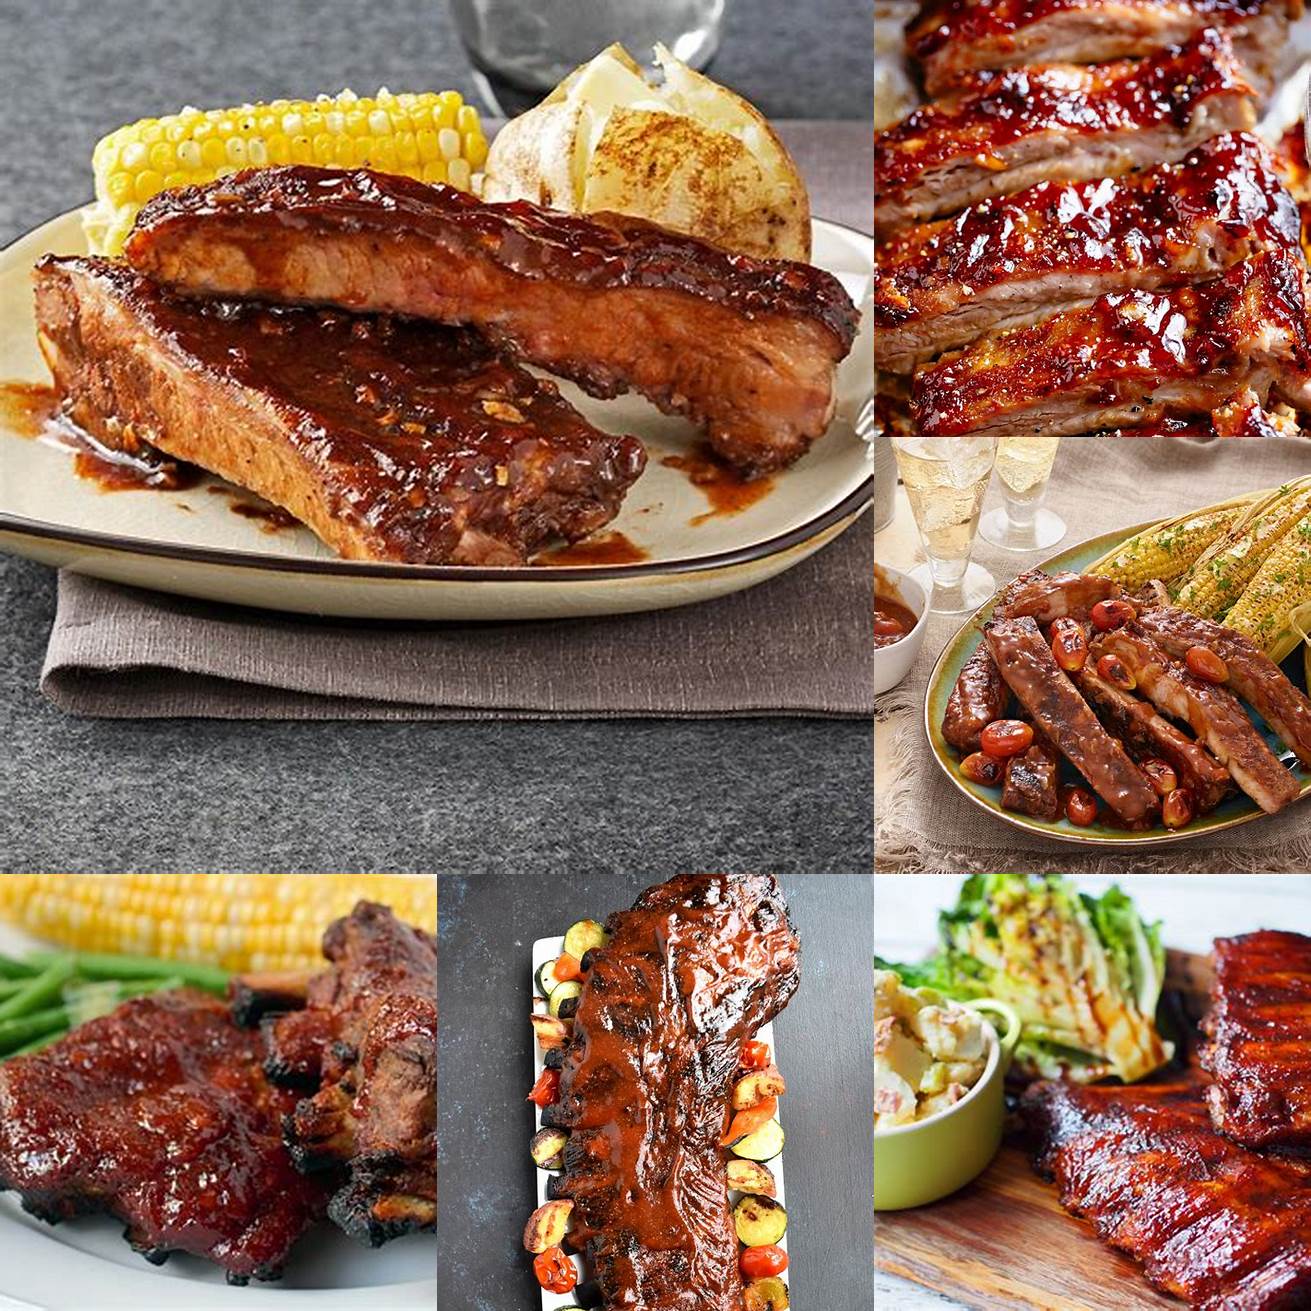 BBQ Ribs BBQ ribs are a Southern classic and are made with a tangy smoky sauce